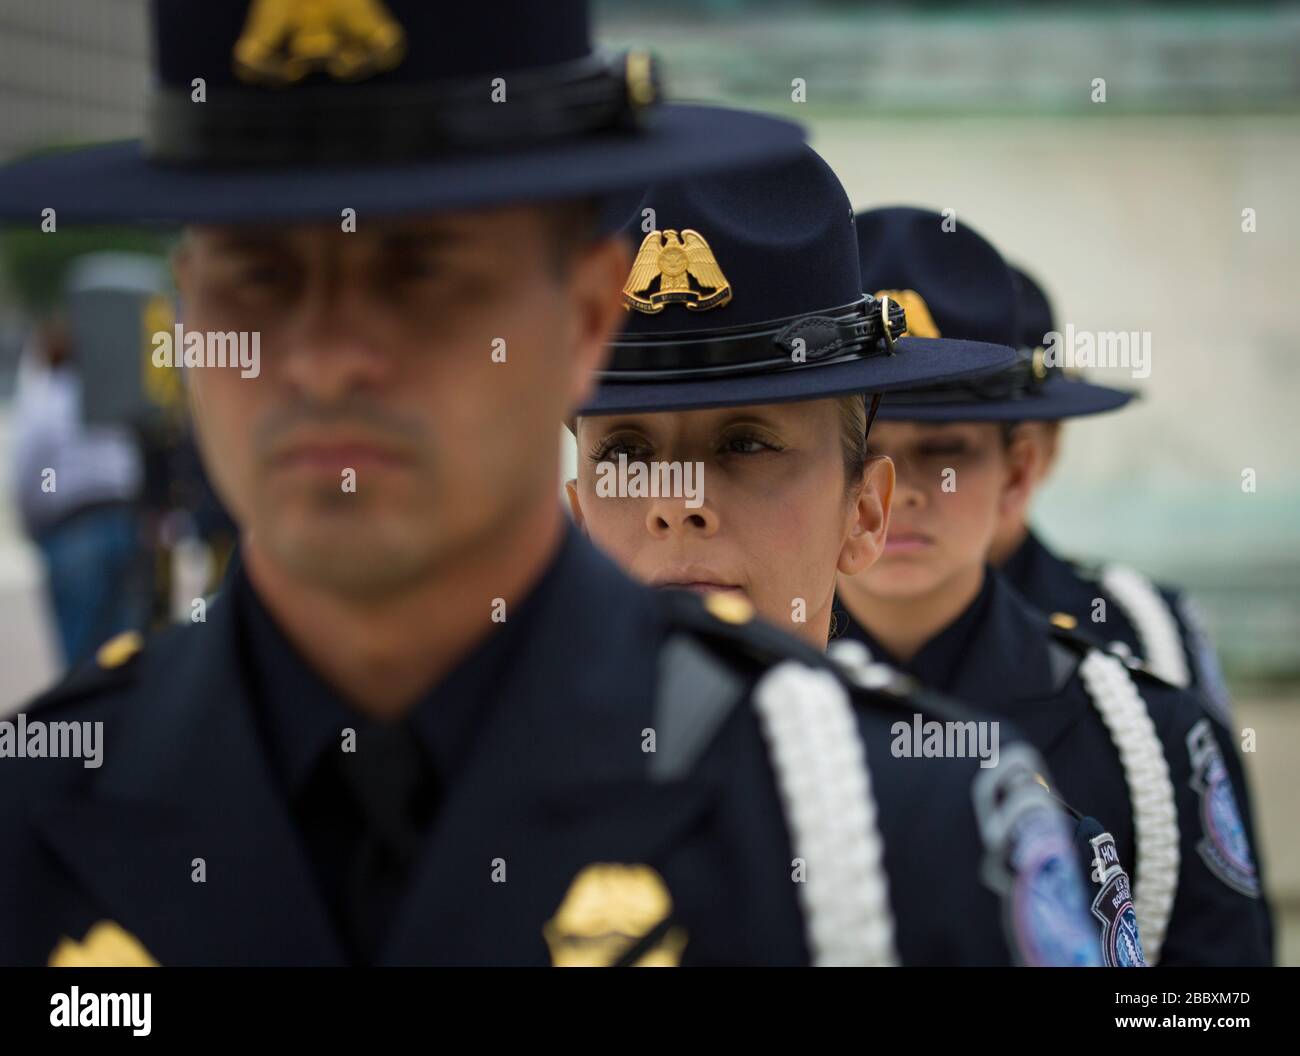 Customs and Border Protection, Office of Field Operations Honor Guard Team compete during National Police Week in Washington D.C. Stock Photo